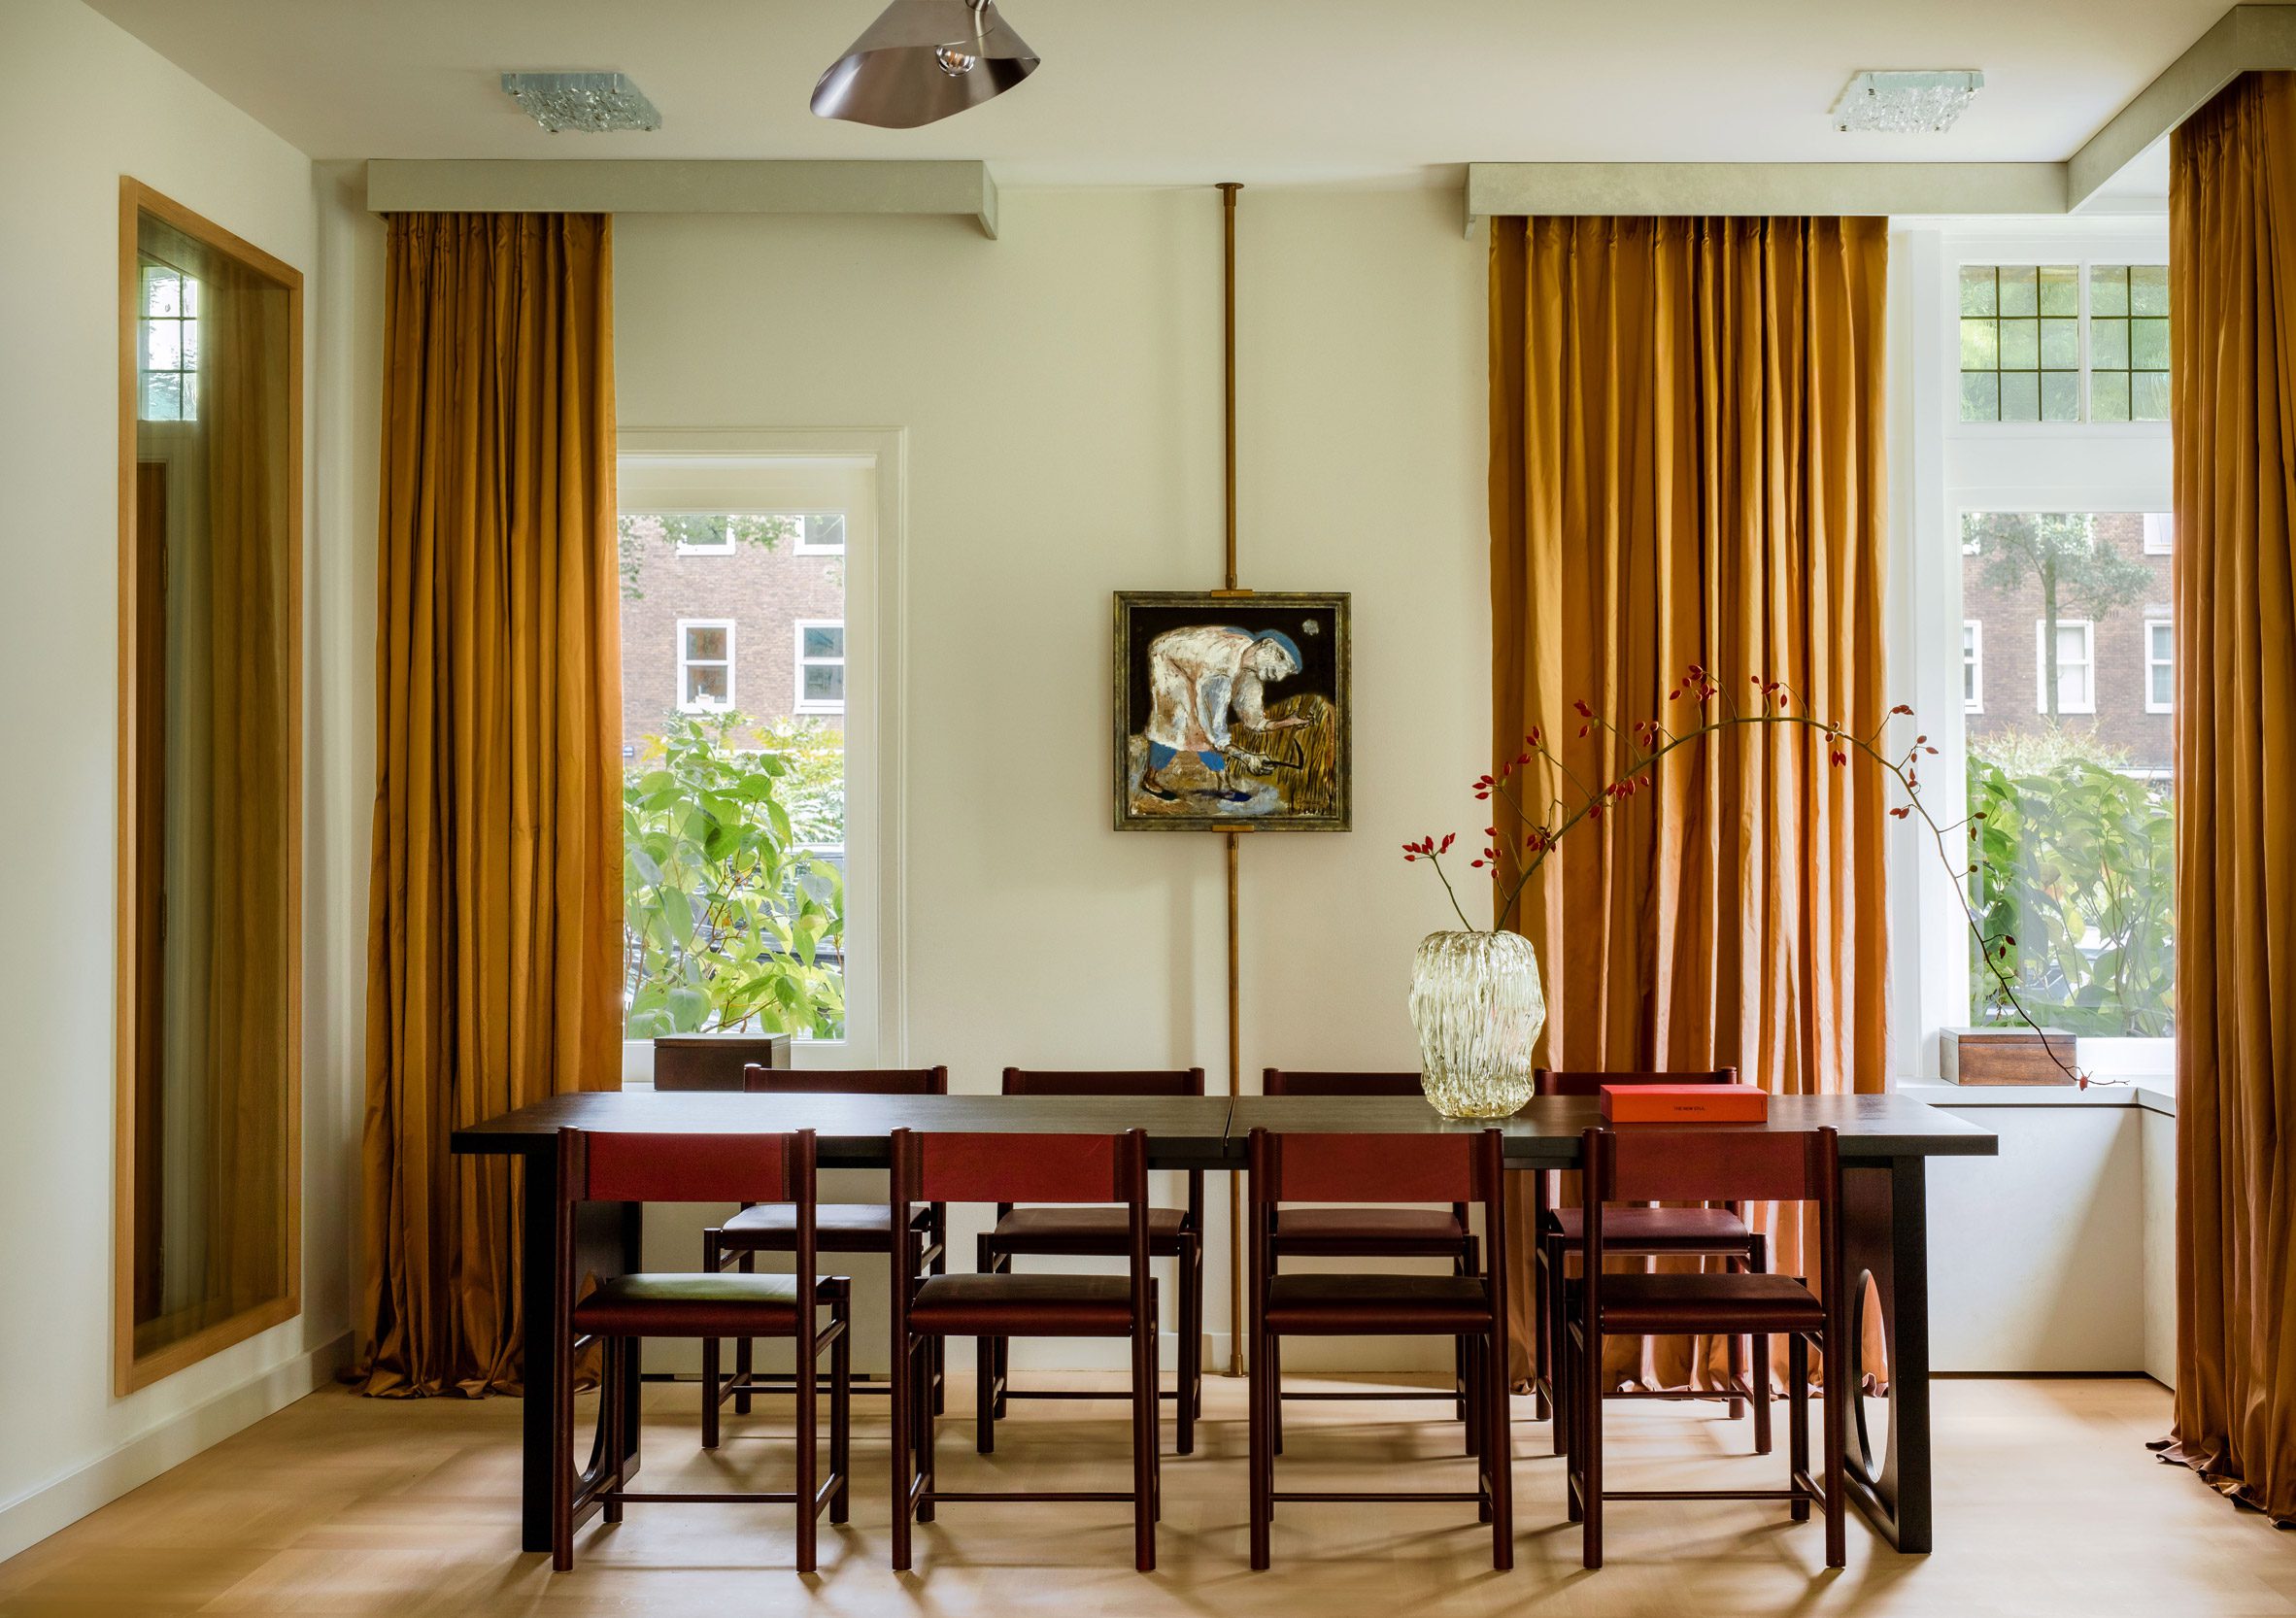 Mustard-coloured curtains in the dining space